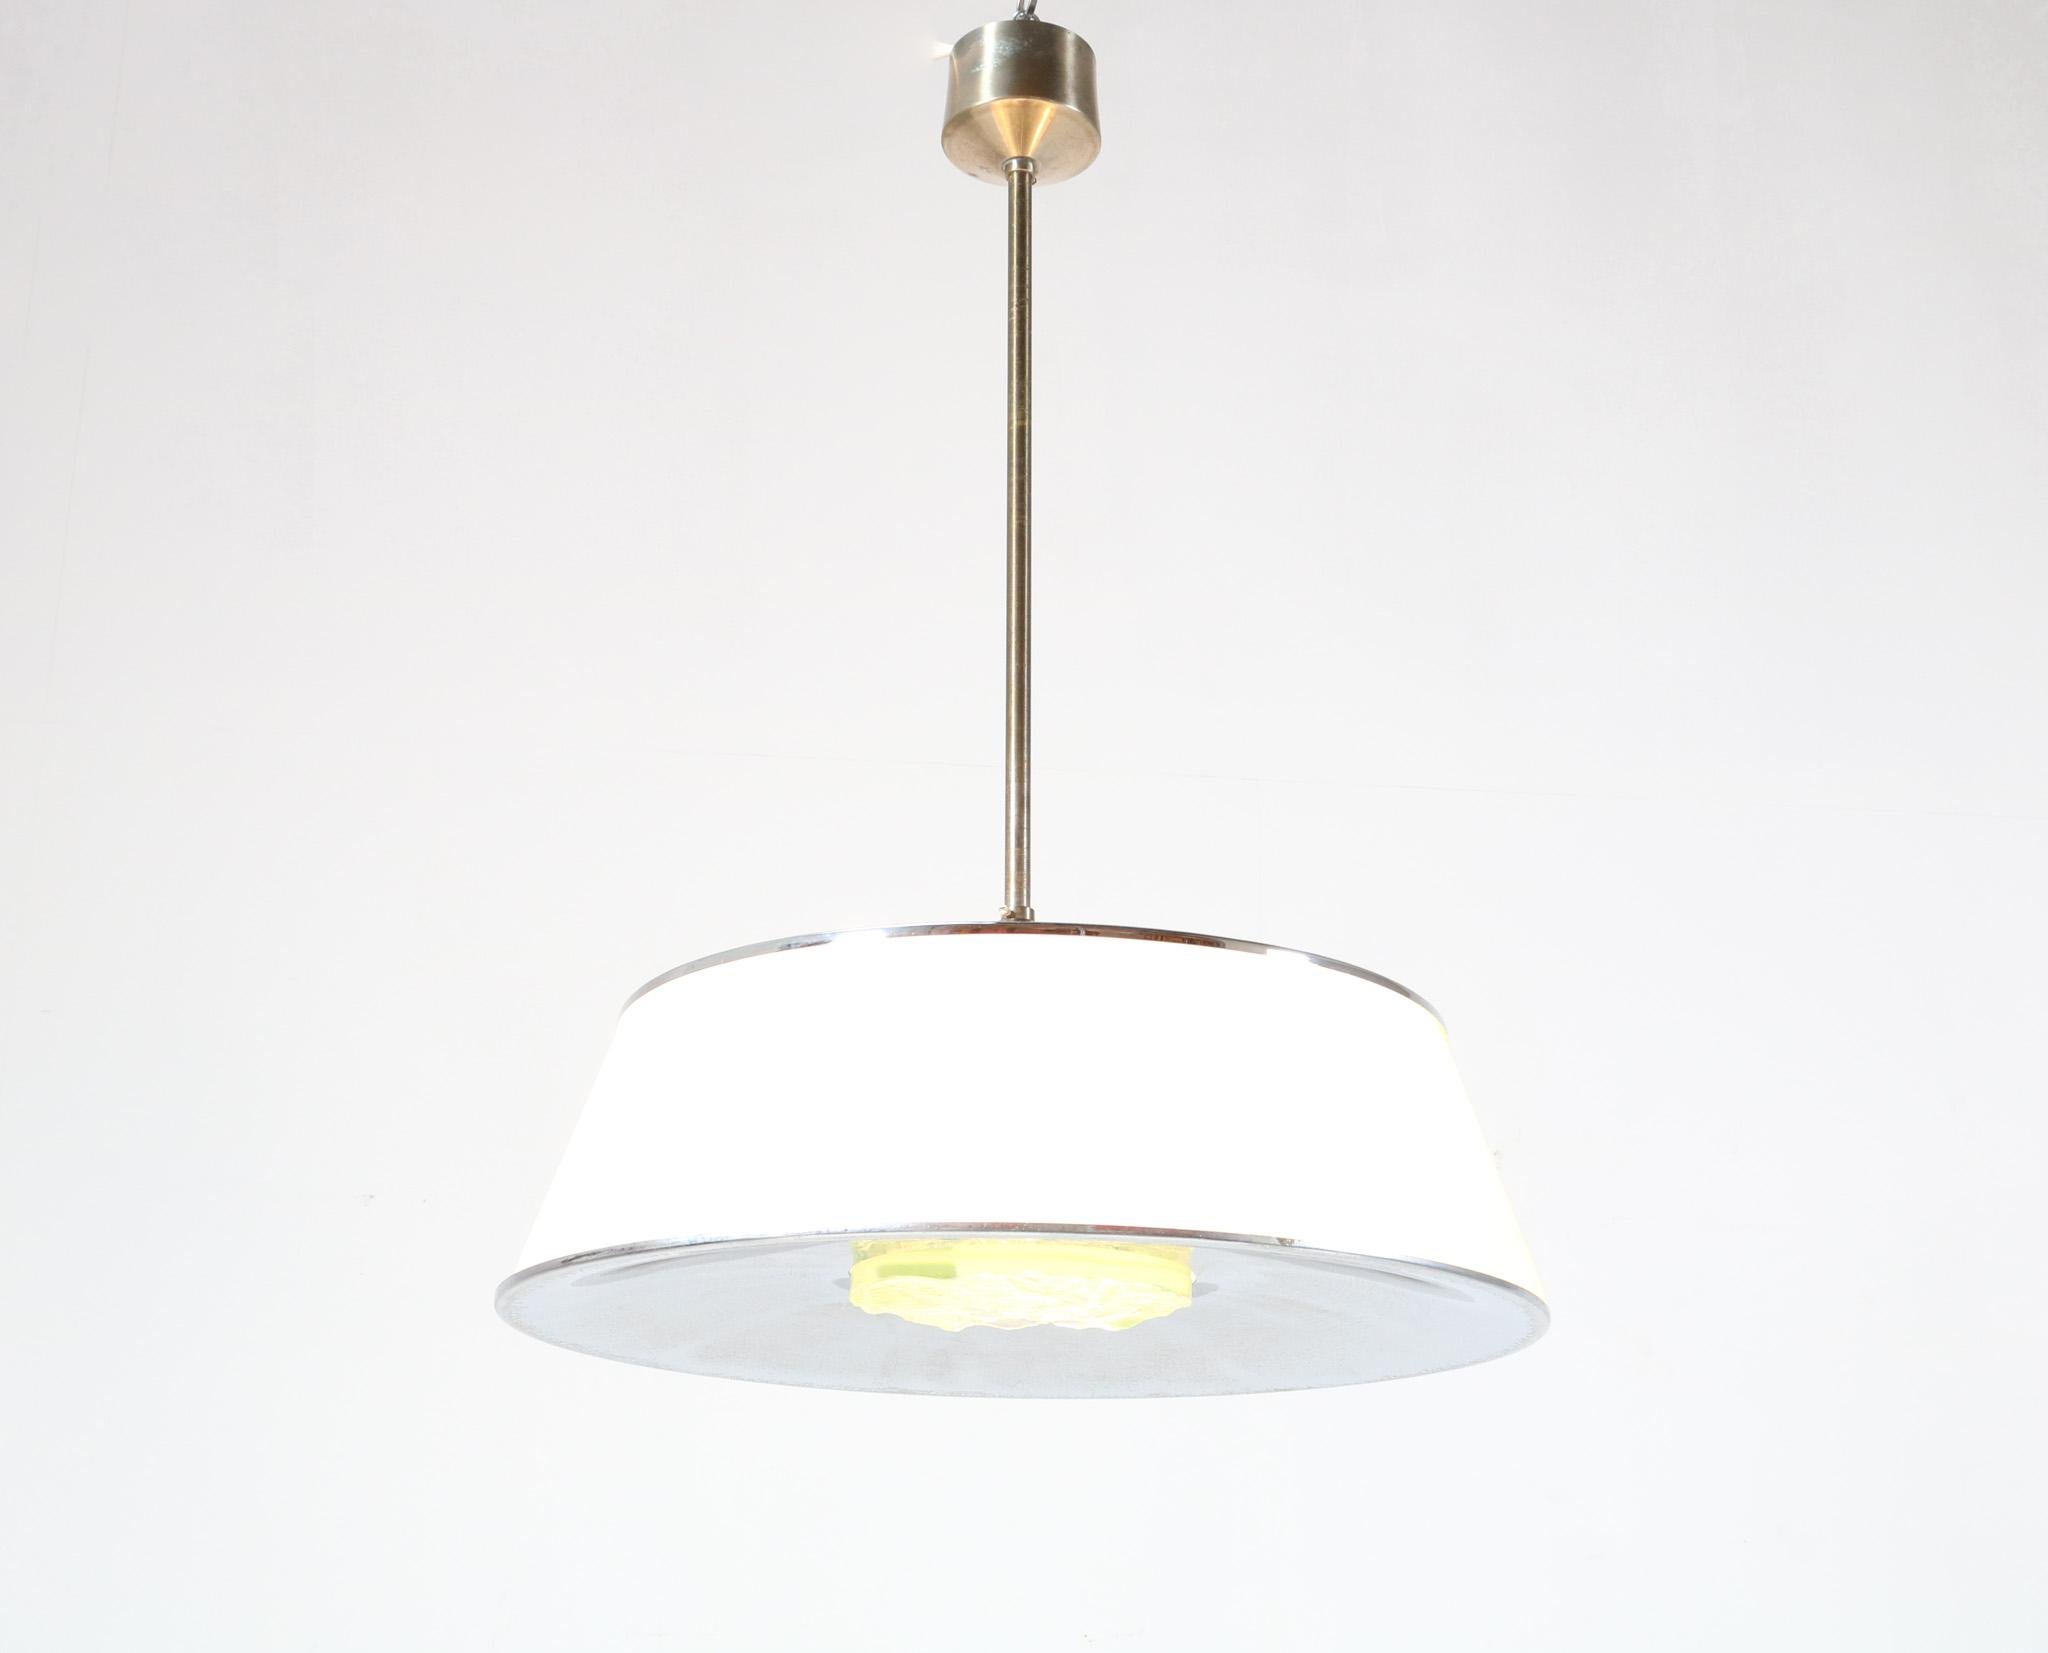 Stunning Mid-Century Modern Model 2364 pendant lamp.
Design by Max Ingrand for Fontana Arte Milano.
Striking Italian design from the 1960s.
This iconic piece of design consists of a large sandblasted opaline conical cylinder sitting on top of a